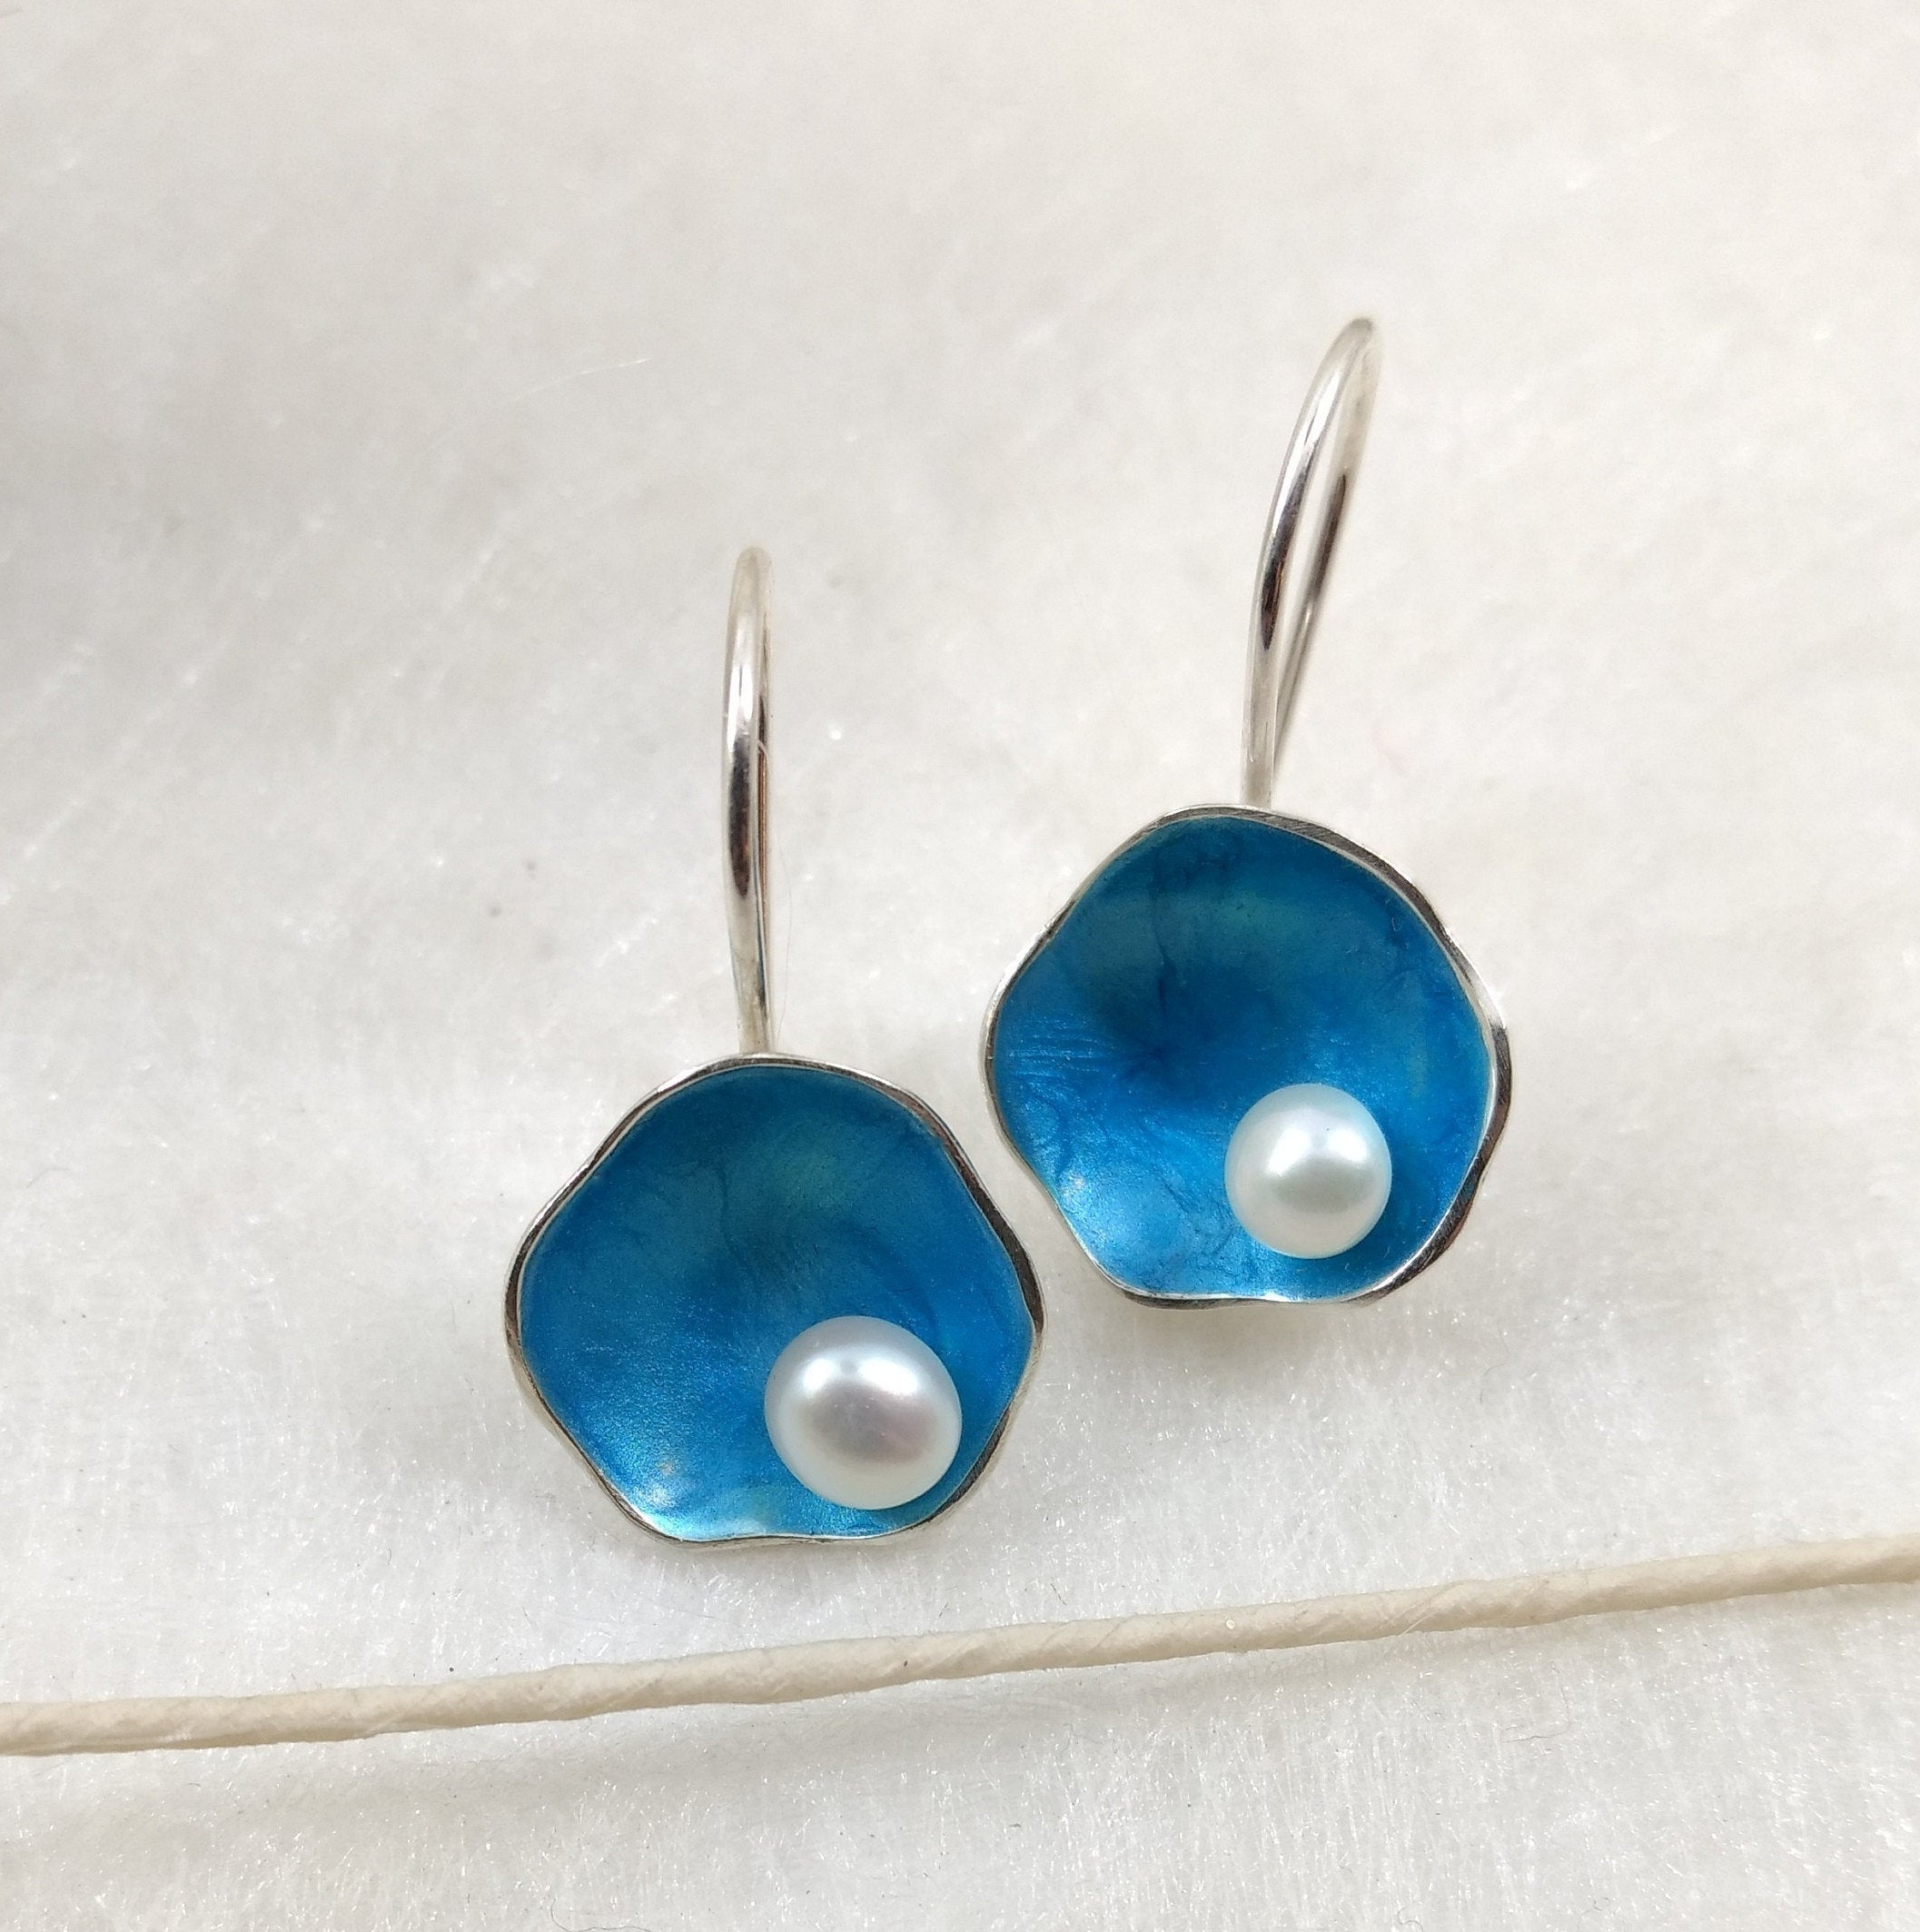 TiKiYa - small enameled Sterling Silver hook earrings with white pearls, available in many colors